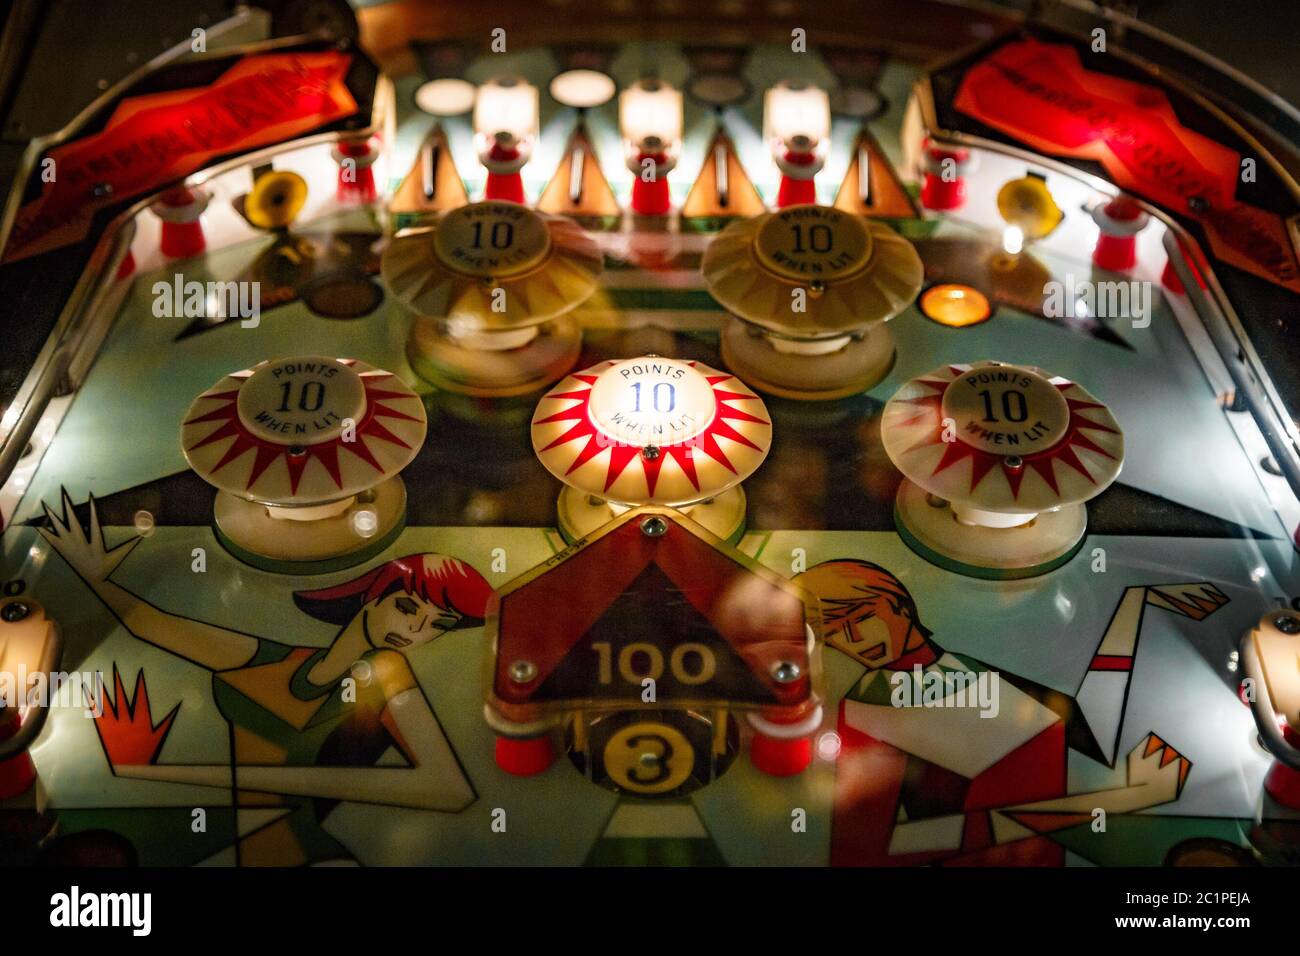 Budapest, Hungary - March 25, 2018: Pinball museum. Pinball table close up view of vintage machine Stock Photo